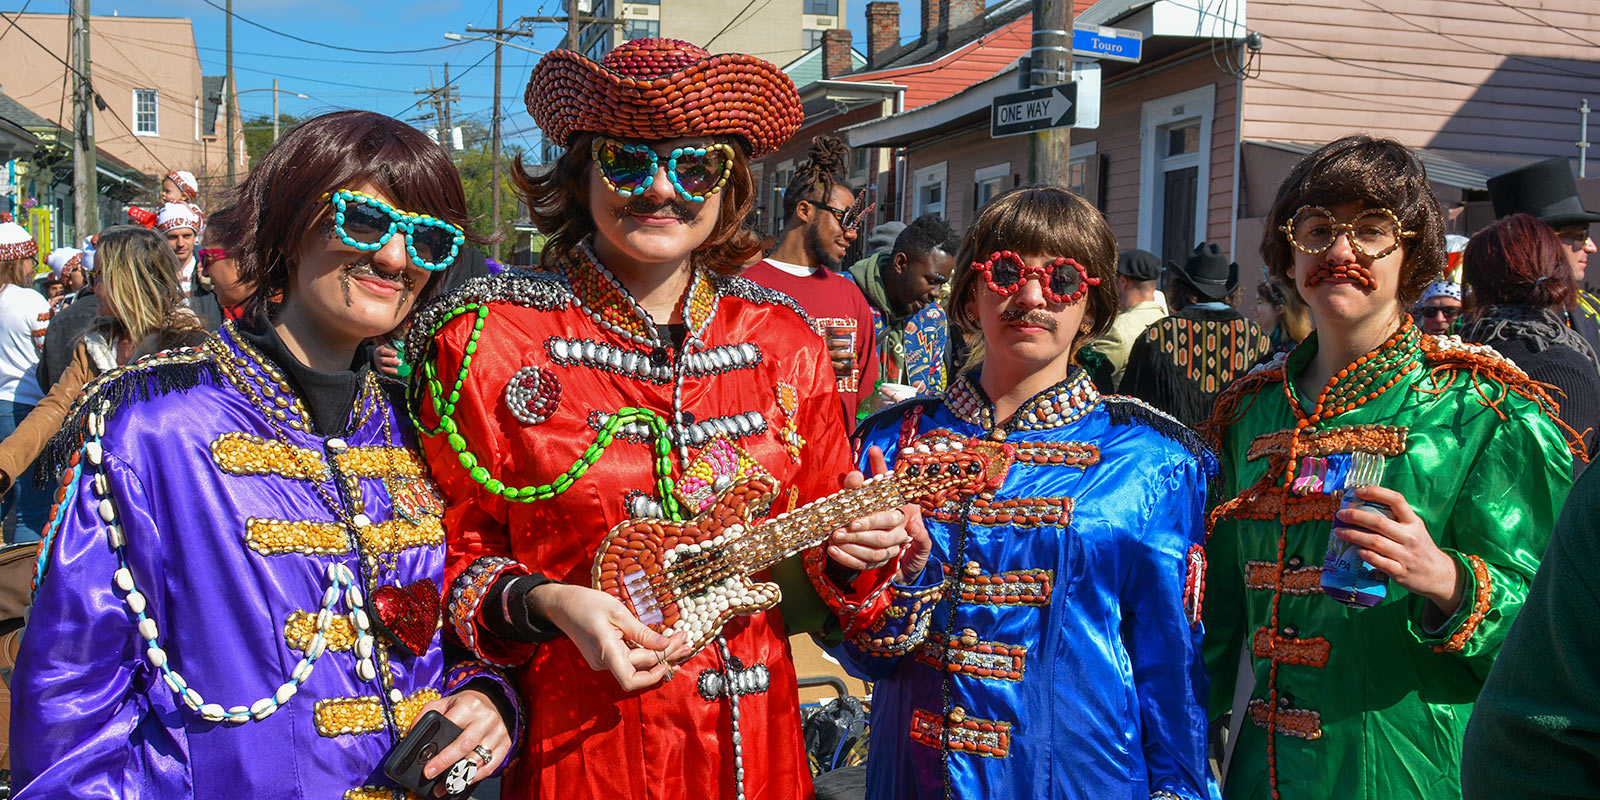 Four revelers dressed up as "The Beantles" for 2019 Krewe of Red Beans parade